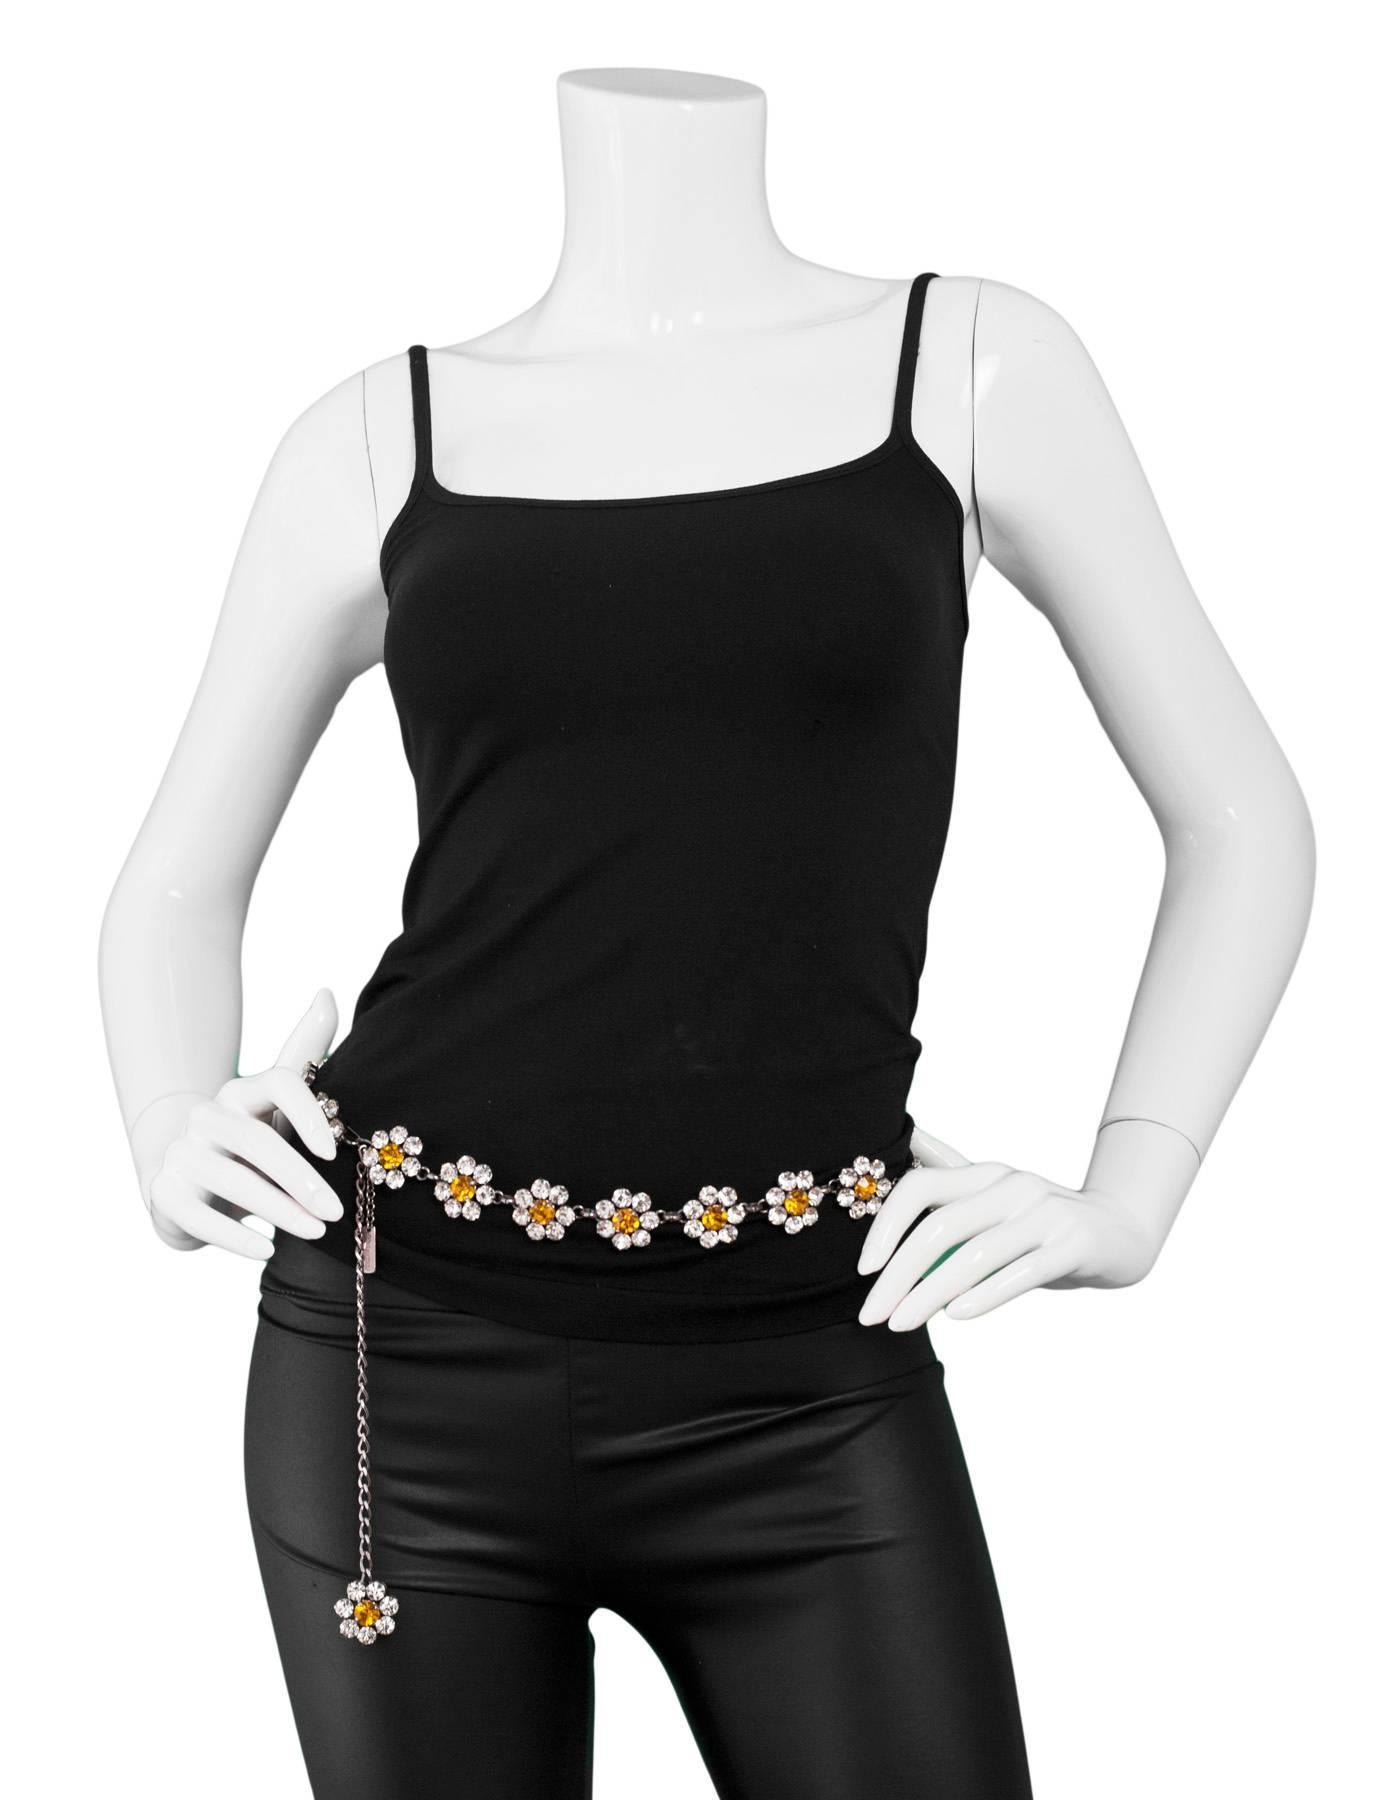 Dolce & Gabbana Crystal Flower Belt

Made In: Italy
Color: White, yellow
Hardware: Crystals, metal
Materials: Metal, crystal
Closure/Opening: Velcro closure
Overall Condition: Excellent - missing one crytal
Includes: Black dust